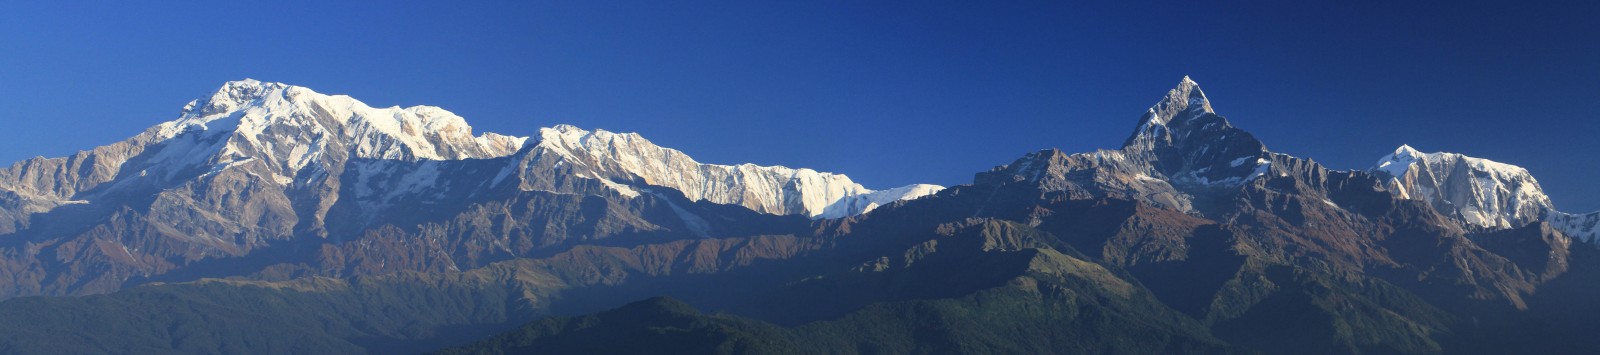  Annapurna base camp trek is an approachable trek that starts and ends in Pokhara, the second biggest city in Nepal